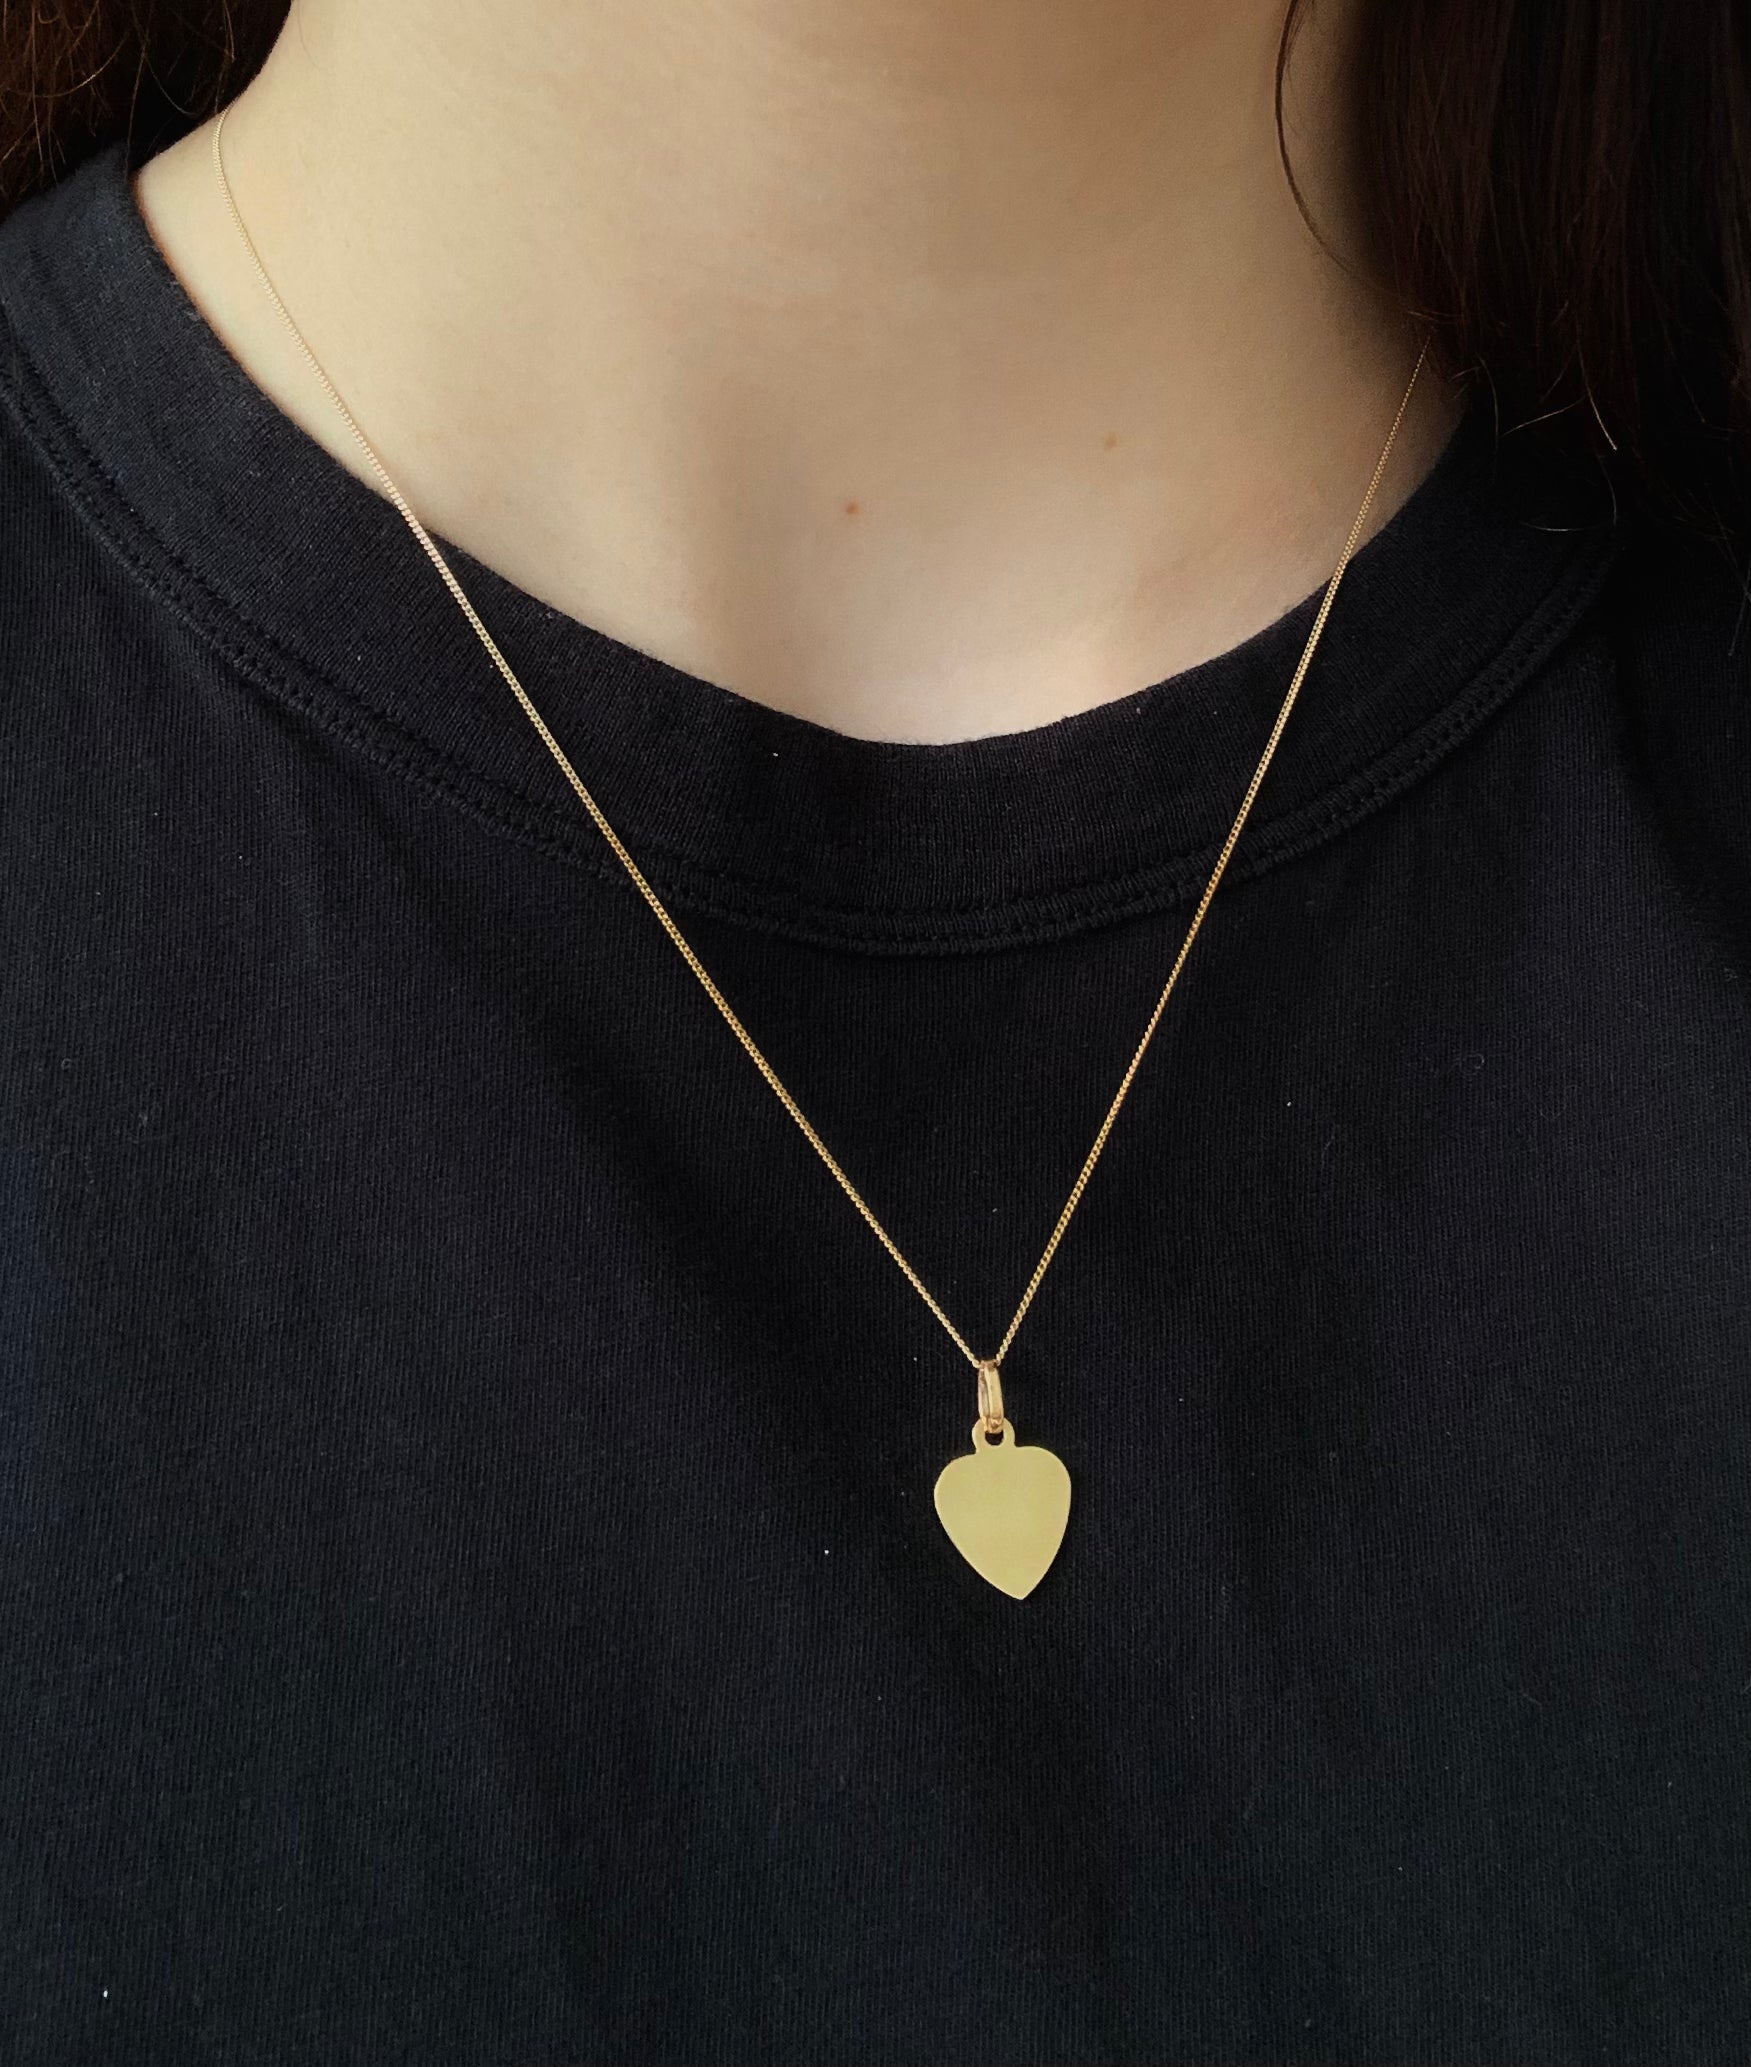 10k solid yellow gold engravable heart shaped pendant